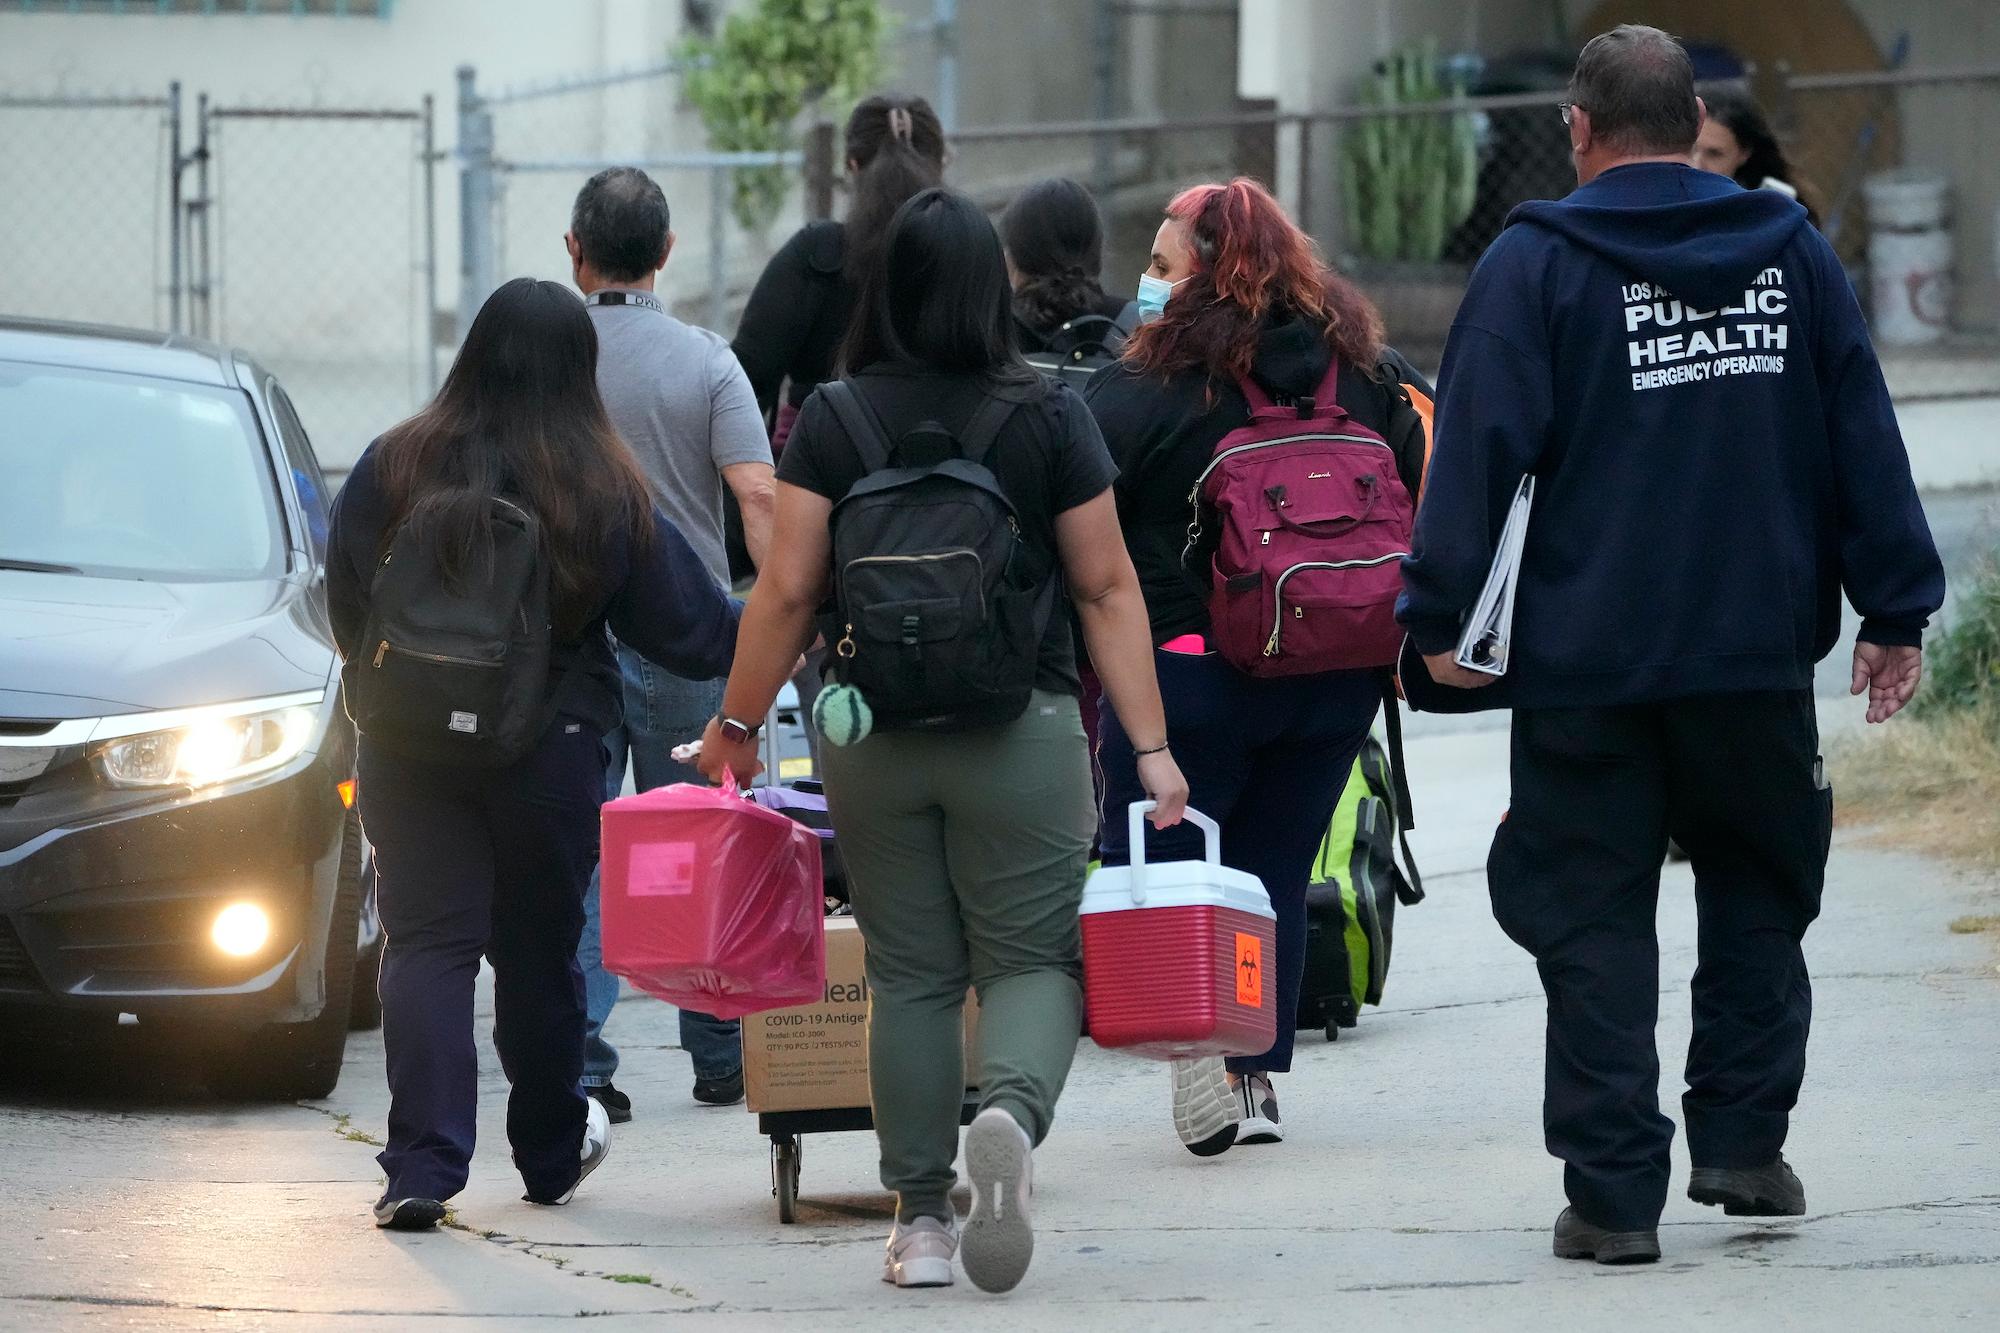 16th Bus of Illegal Immigrants From Texas Arrives in Los Angeles